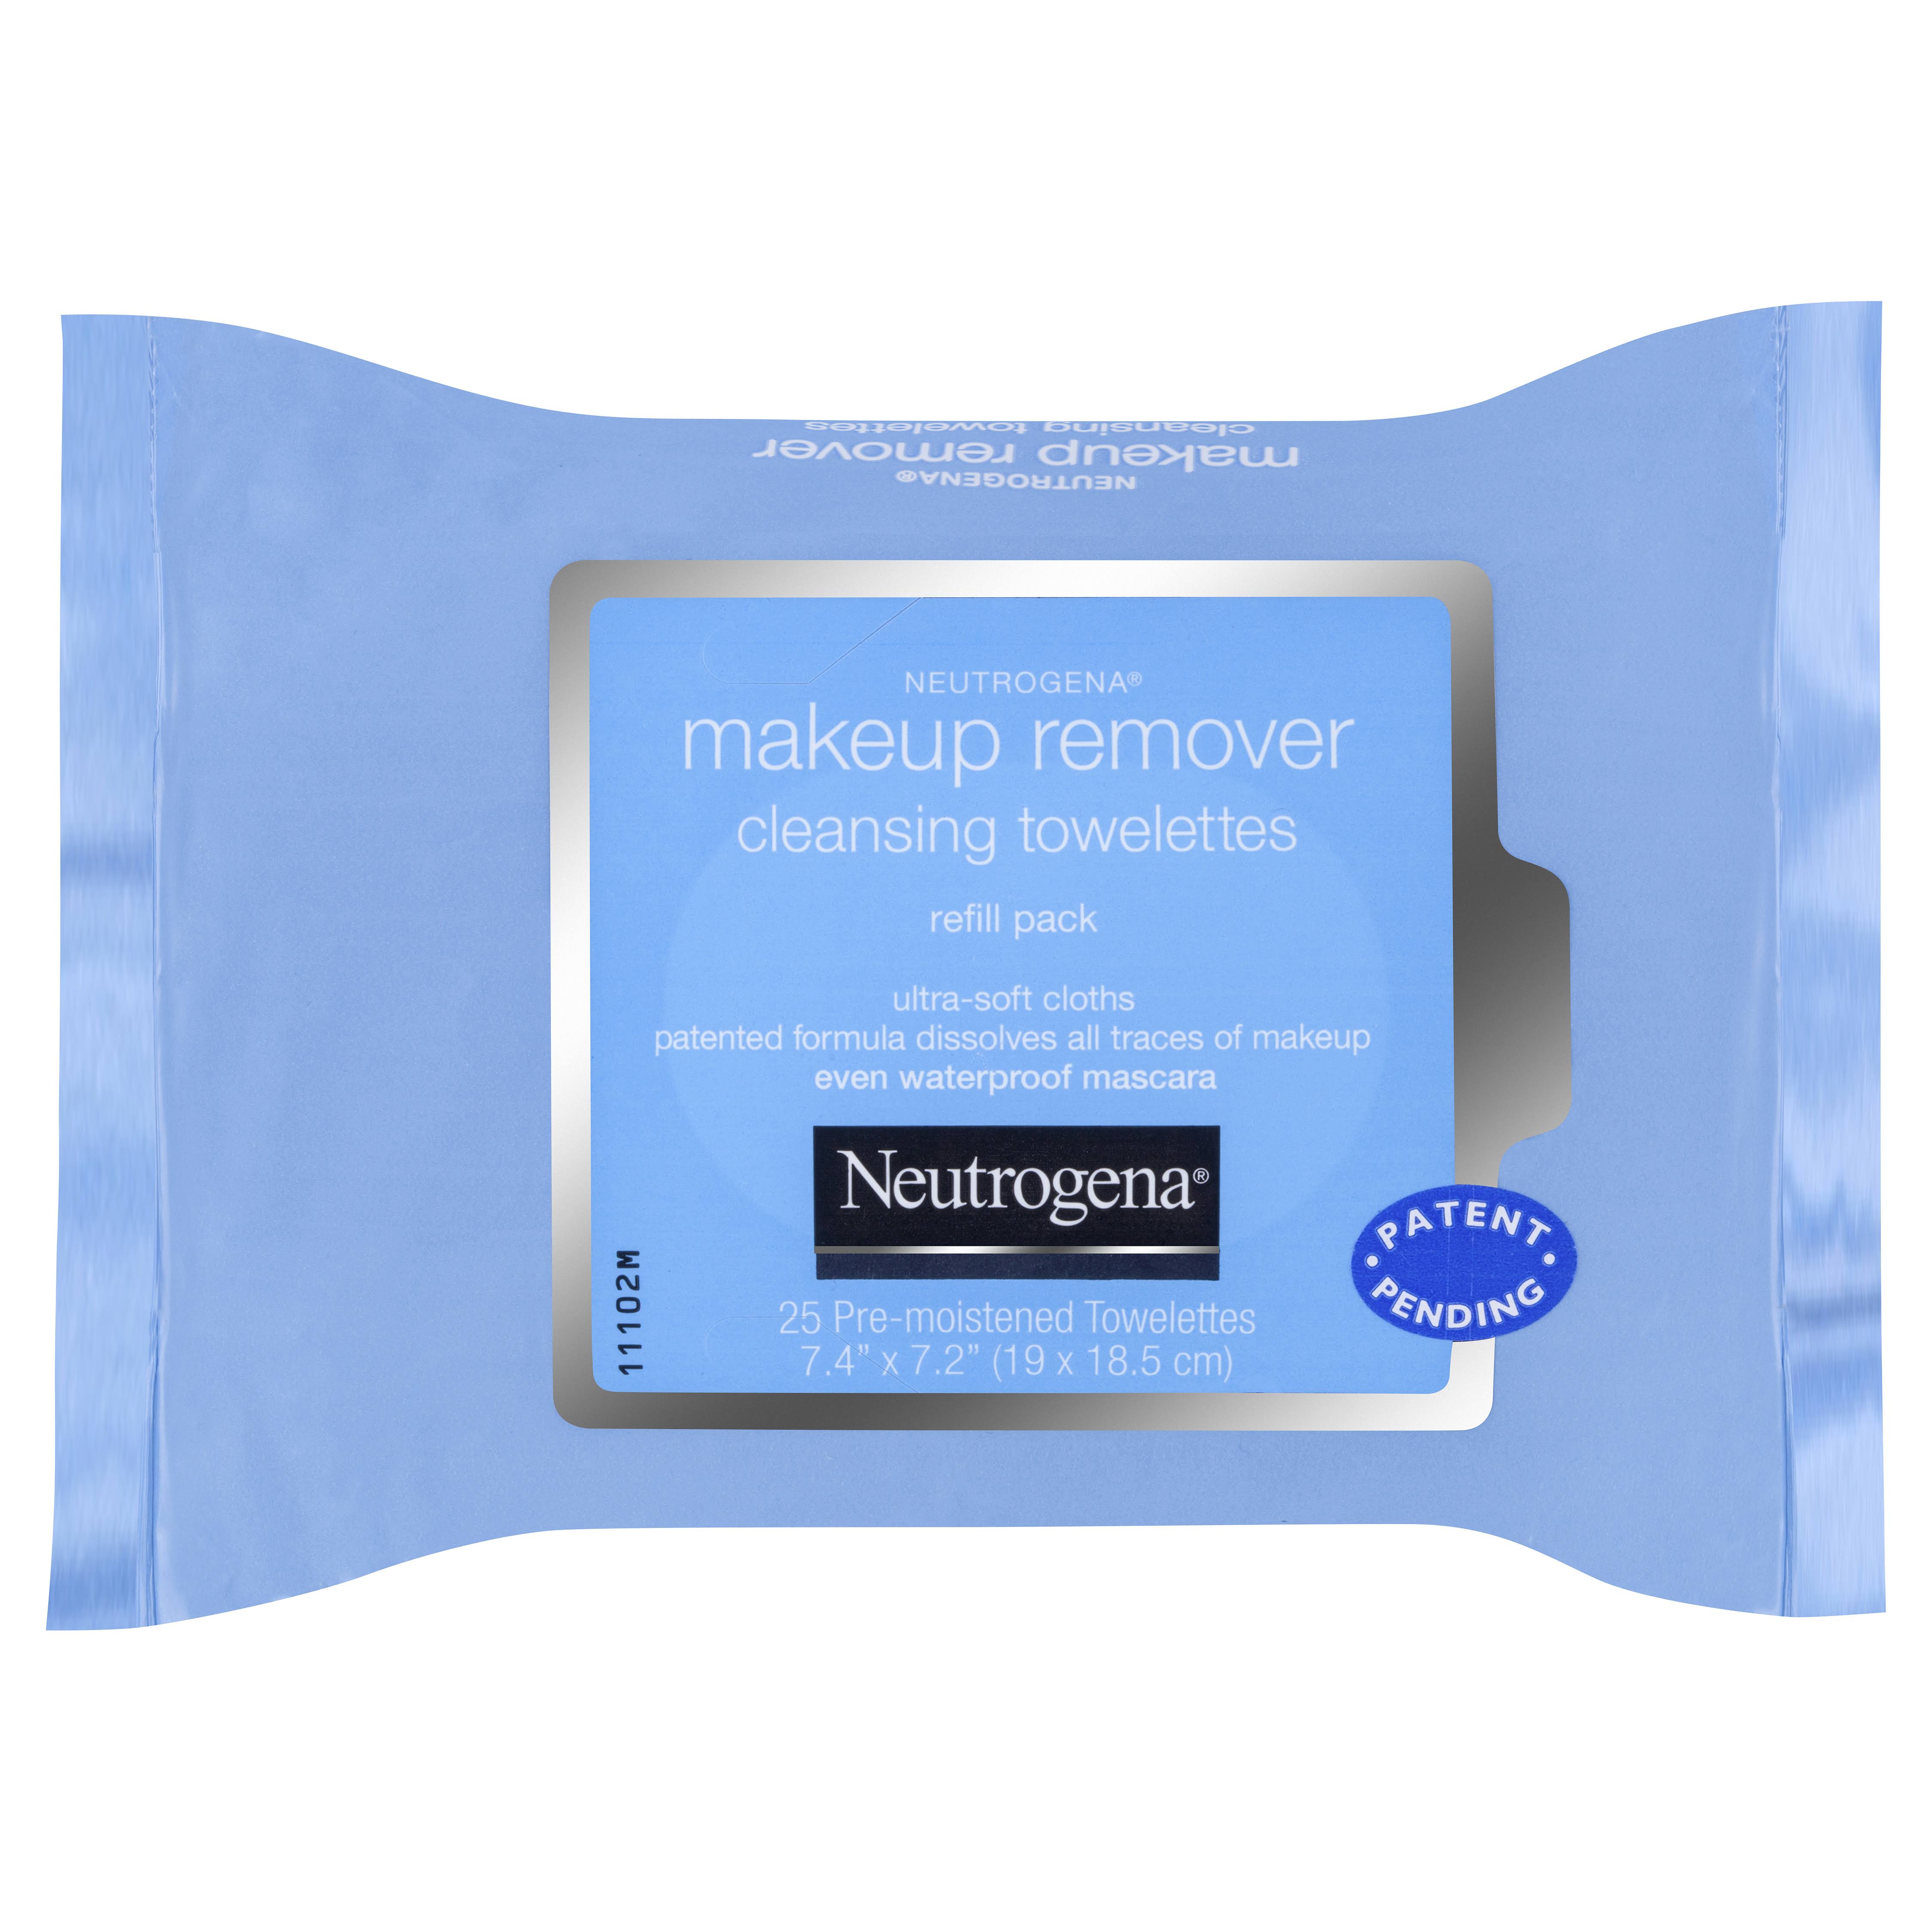 Neutrogena Make-up Remover Cleansing Towelettes - 25 ct